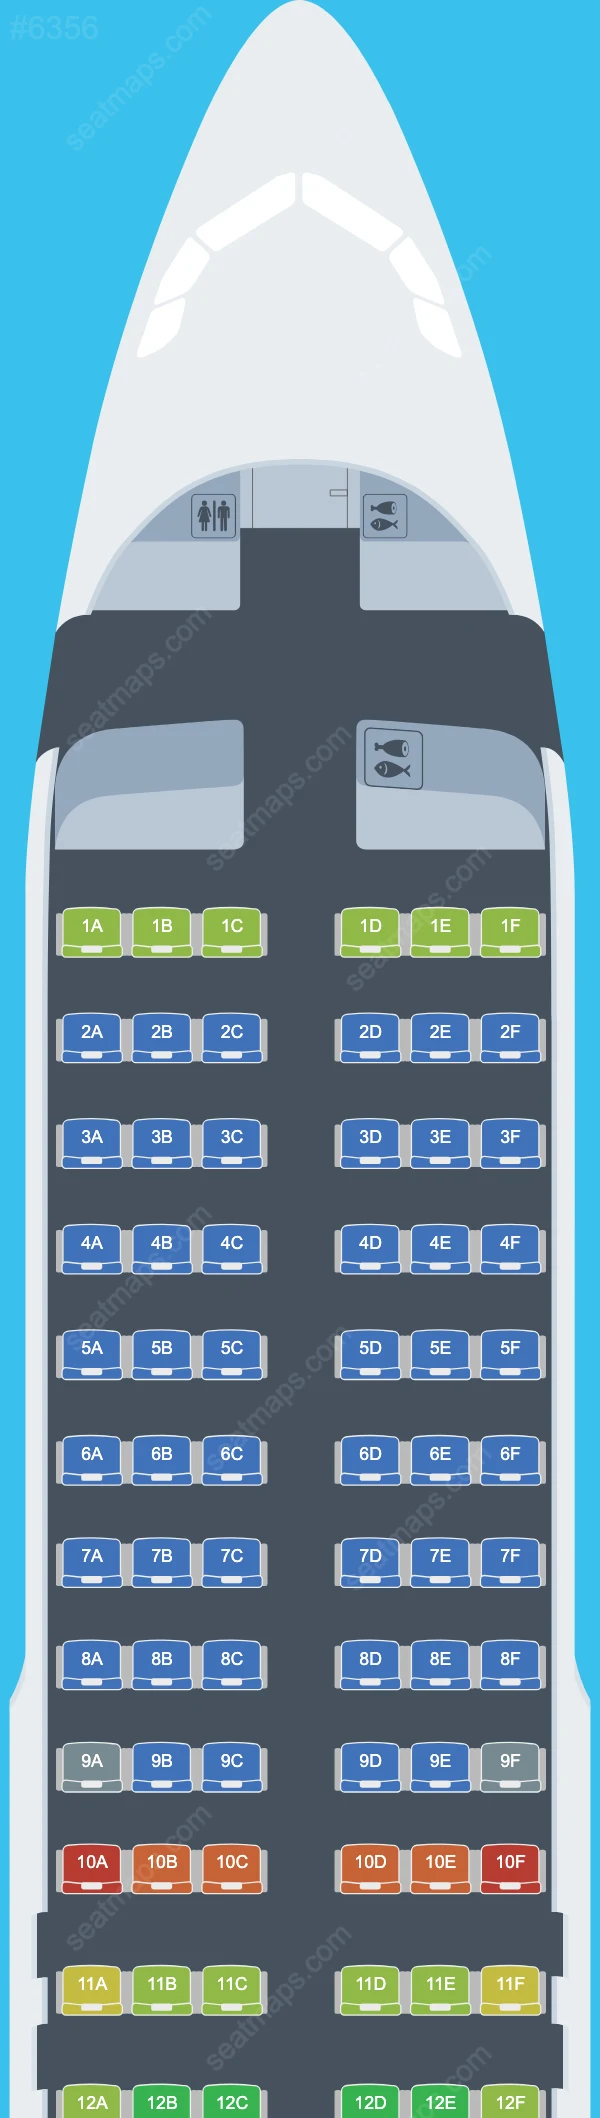 Aegean Airlines Airbus A320 Seat Maps A320-200 V.1